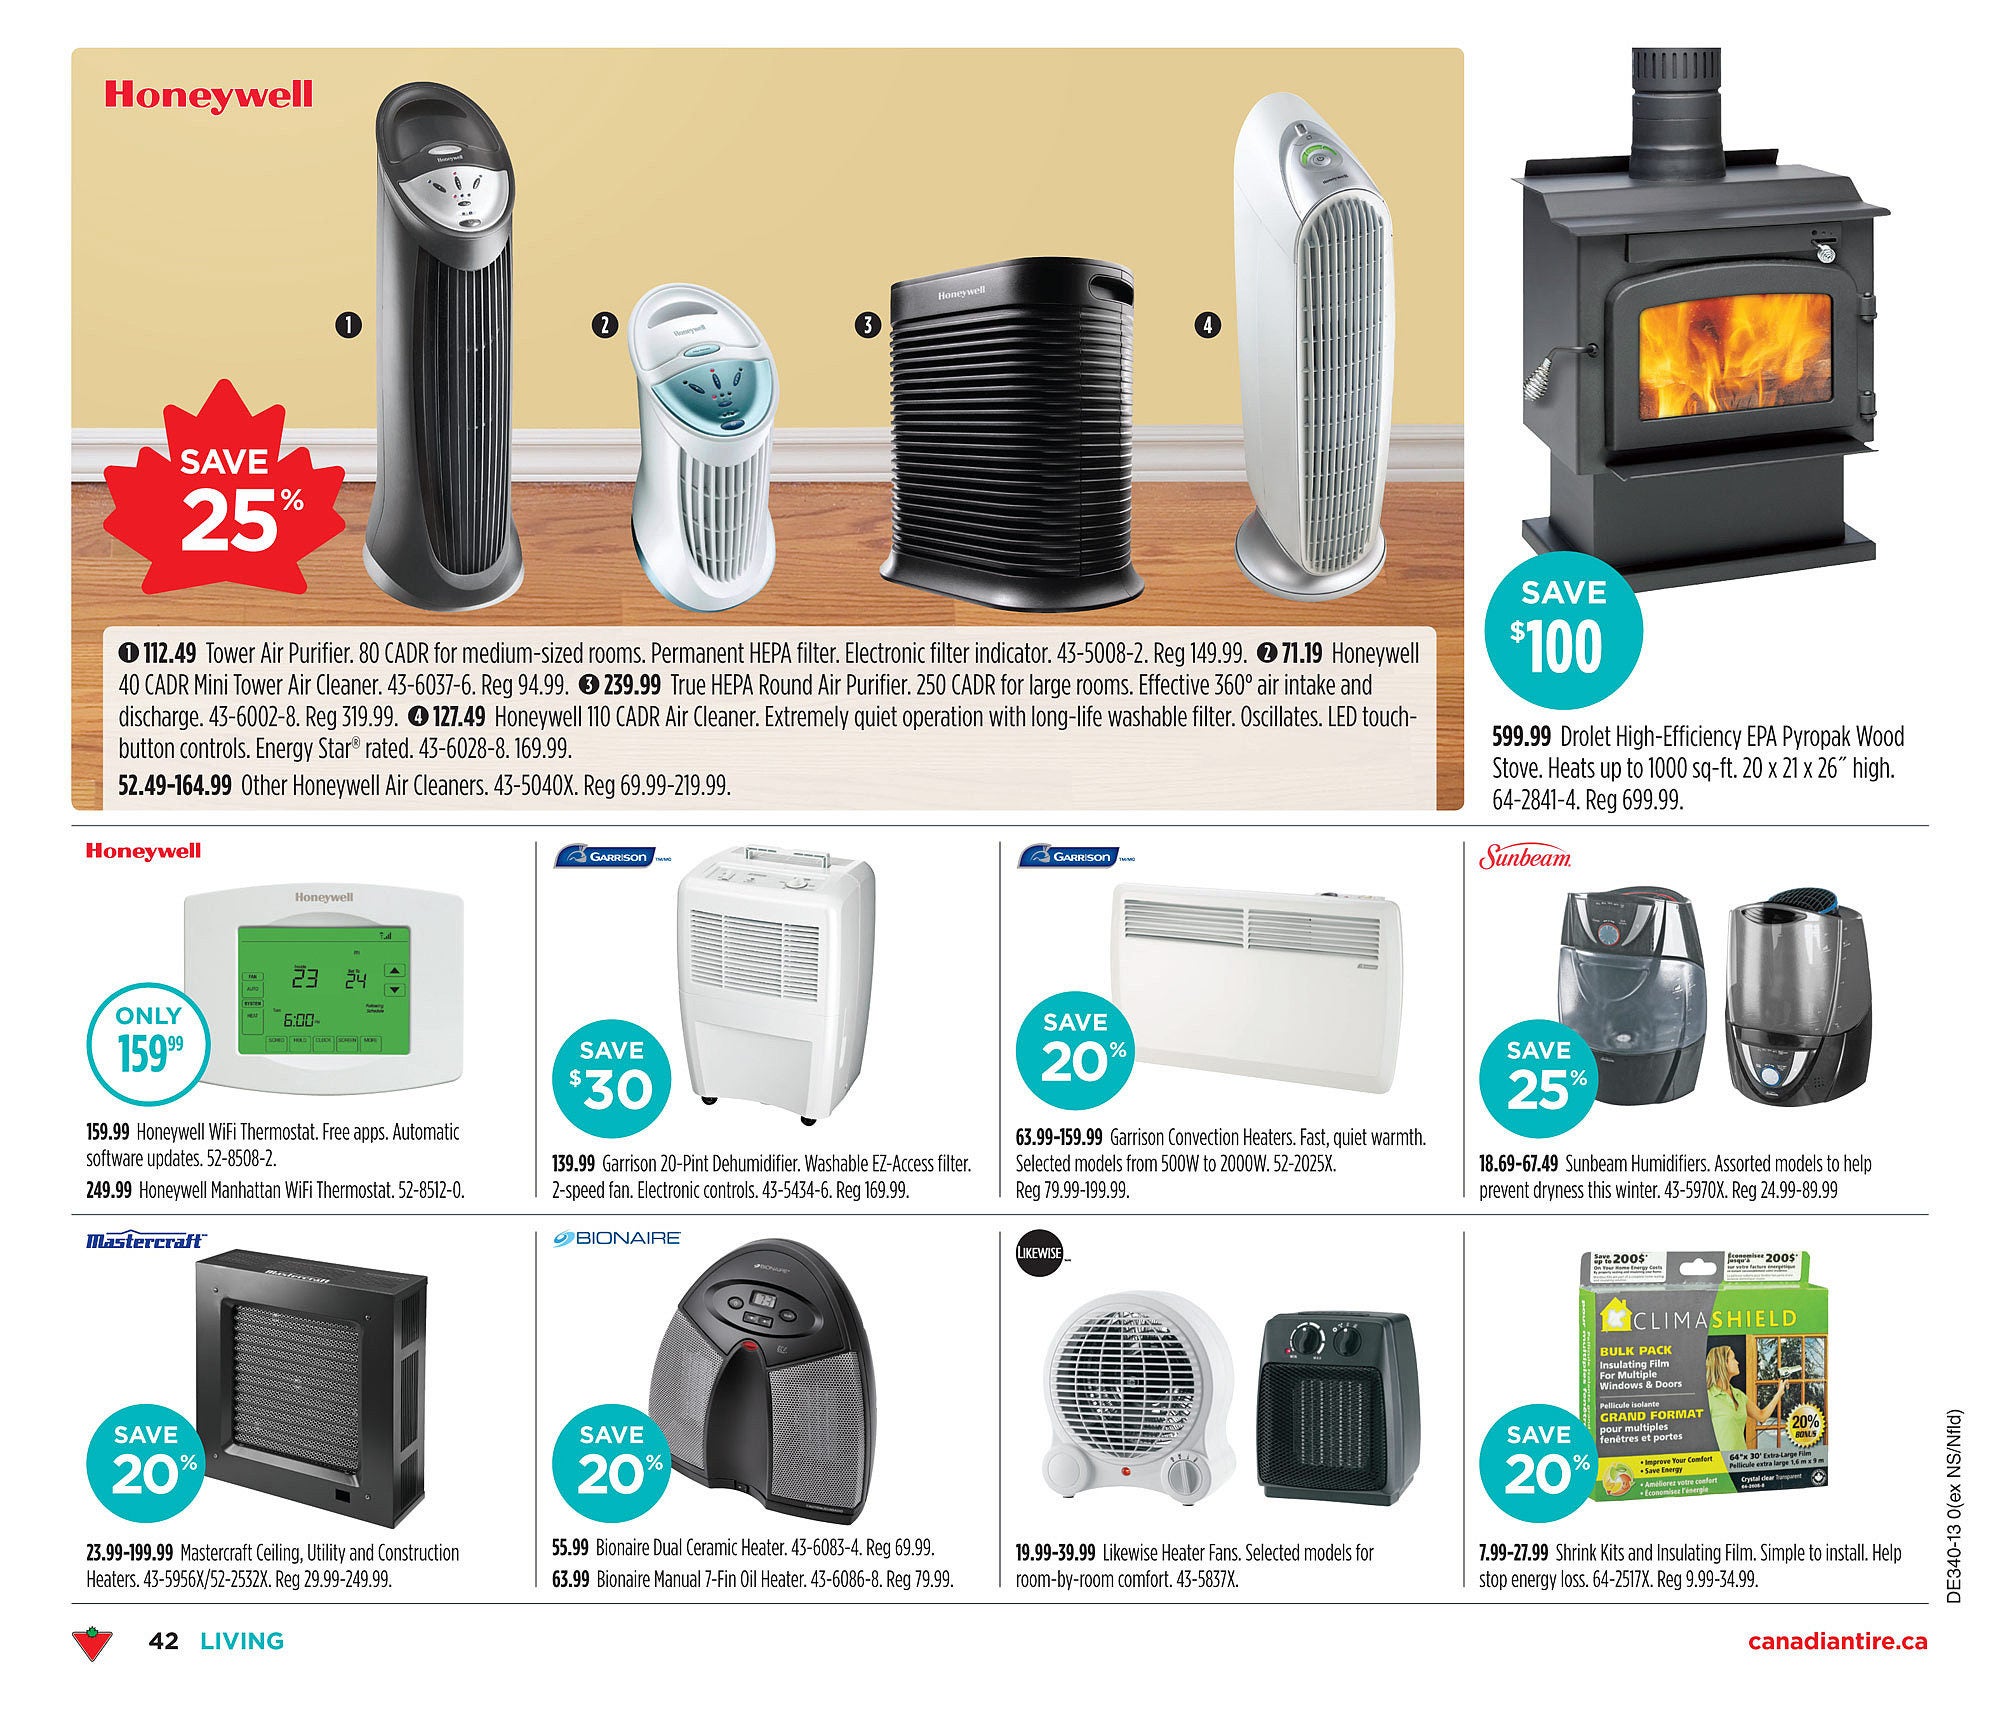 Canadian Tire Weekly Flyer Weekly Flyer Sep 26 – Oct 3